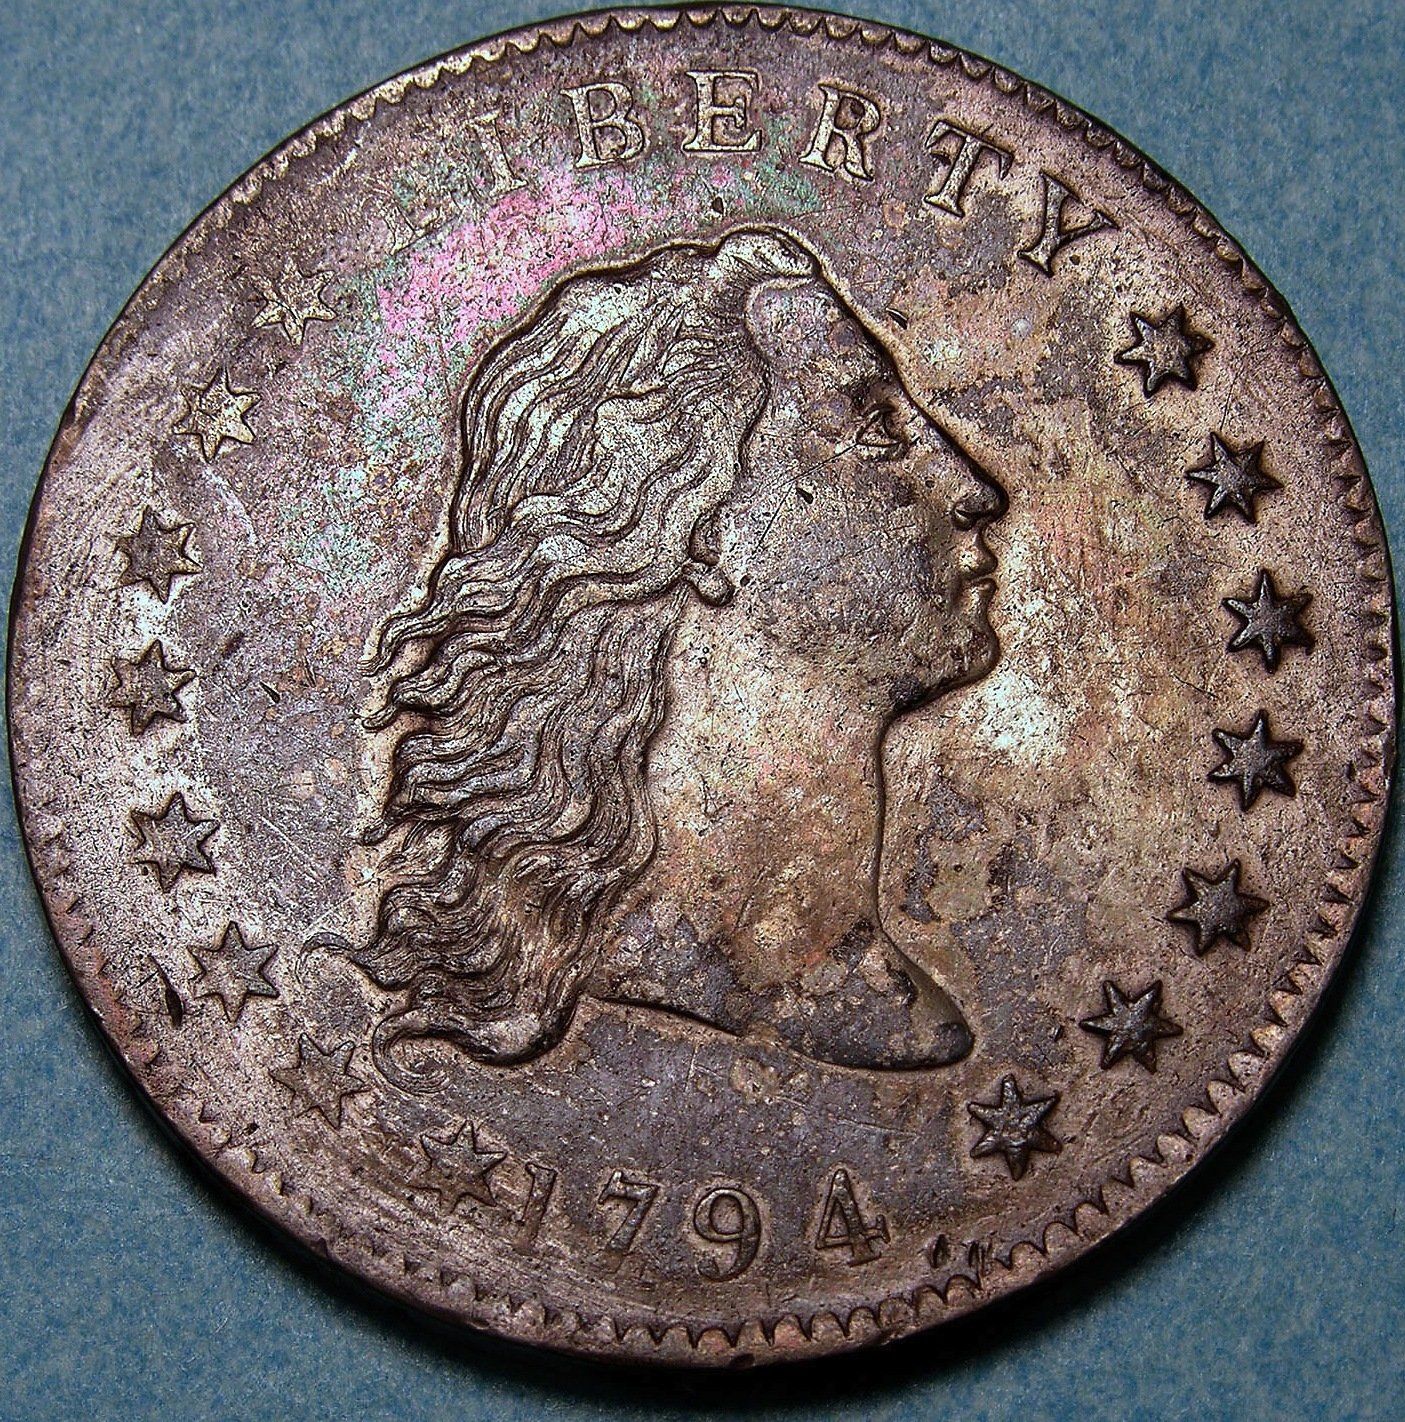 1794 flowing hair dollar - image courtesy of the National Numismatic Collection, National Museum of American History